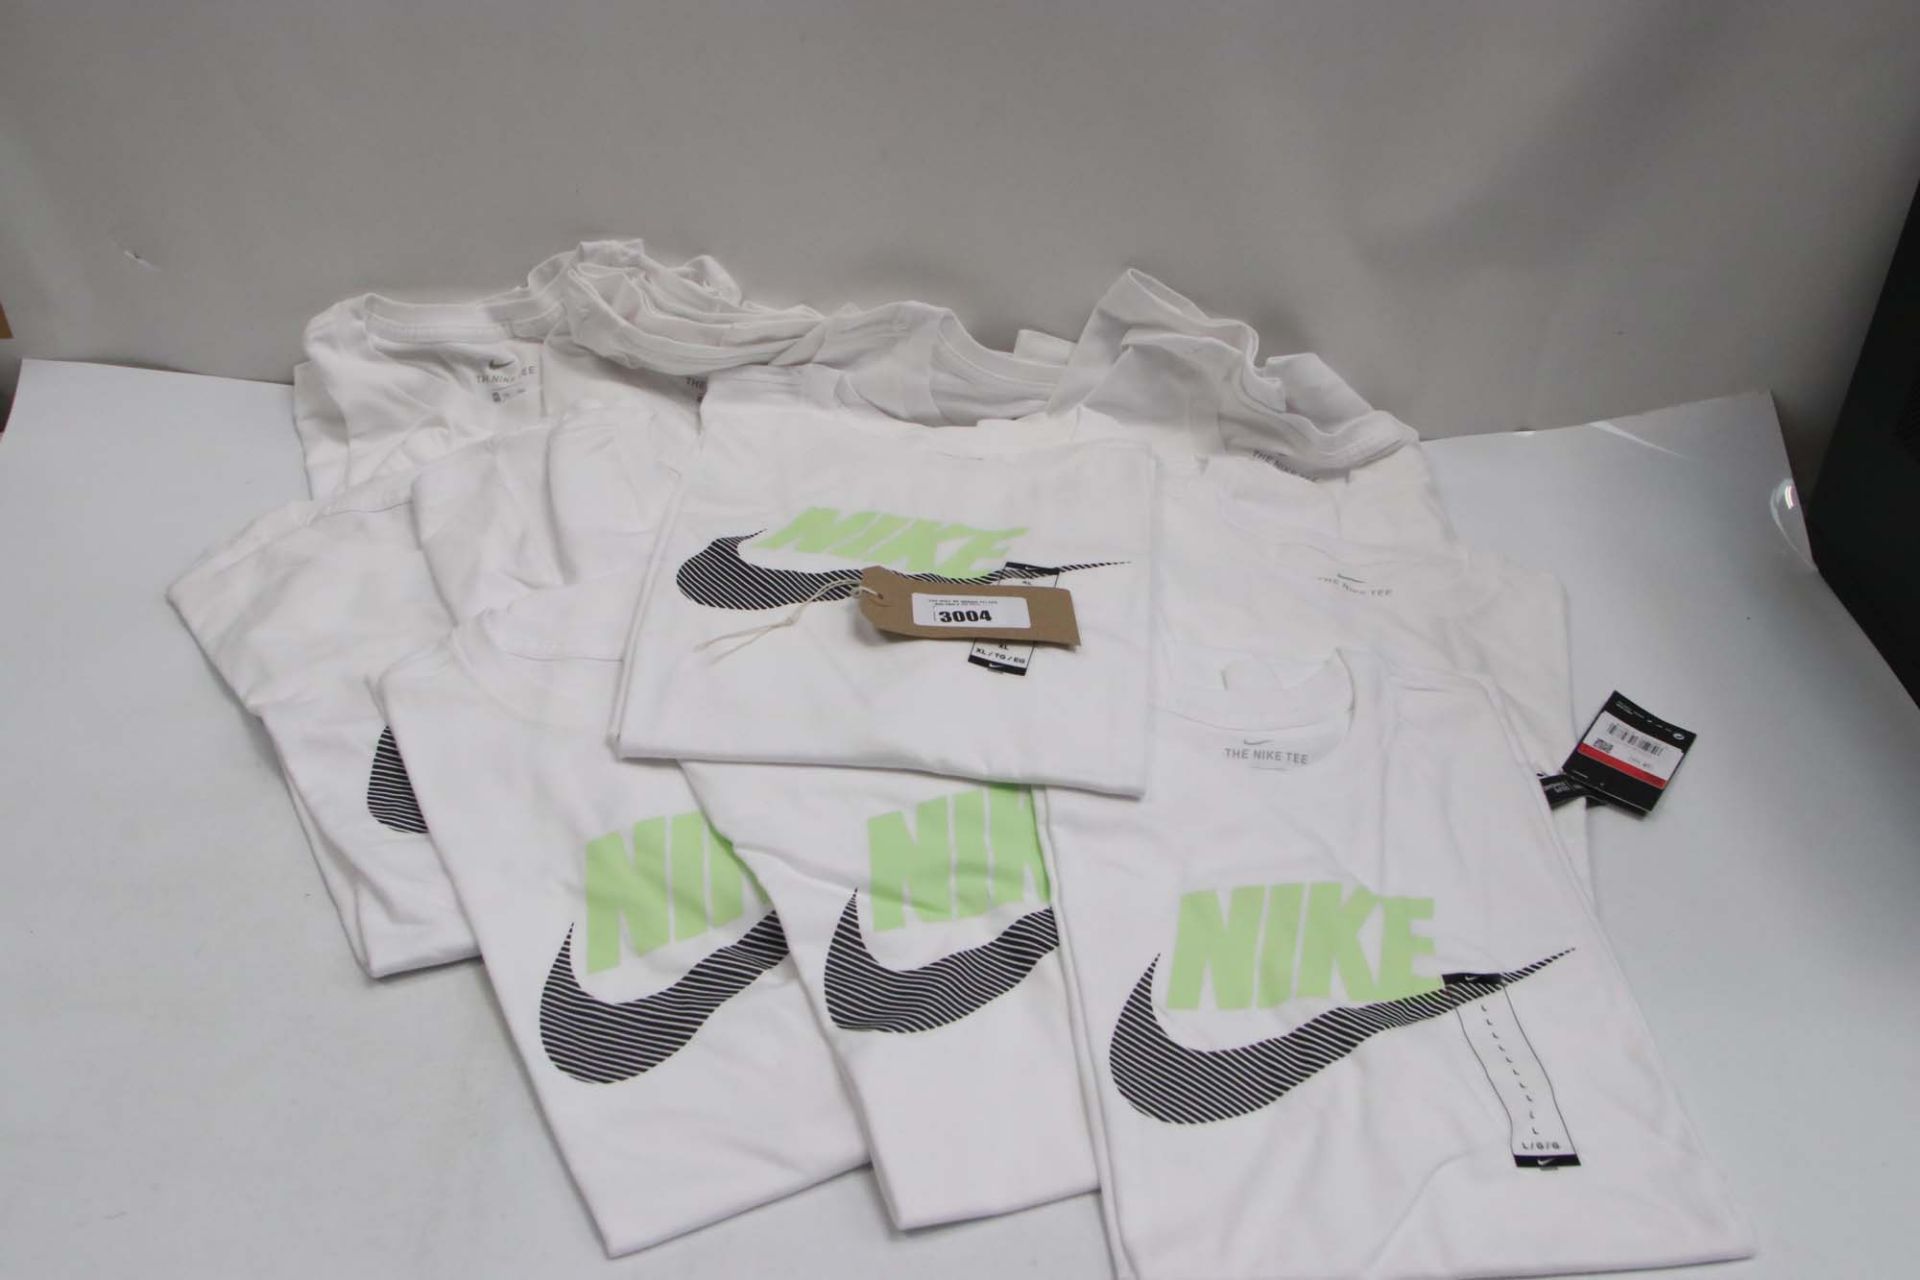 10 Nike t-shirts in white